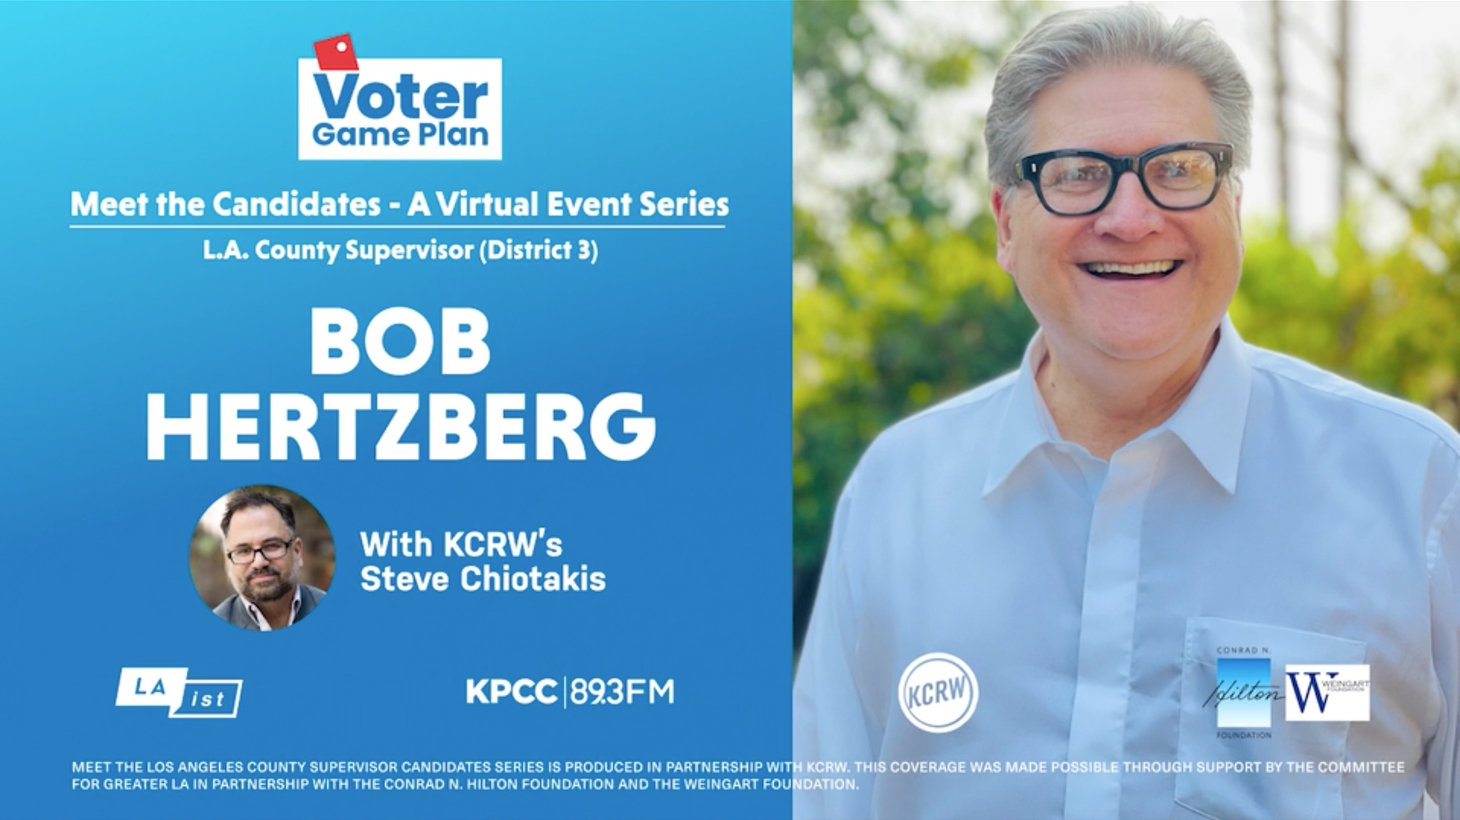 Bob Hertzberg, one of the three leading candidates seeking to represent the 3rd District of the LA County Board of Supervisors, speaks with KCRW and KPCC/LAist.